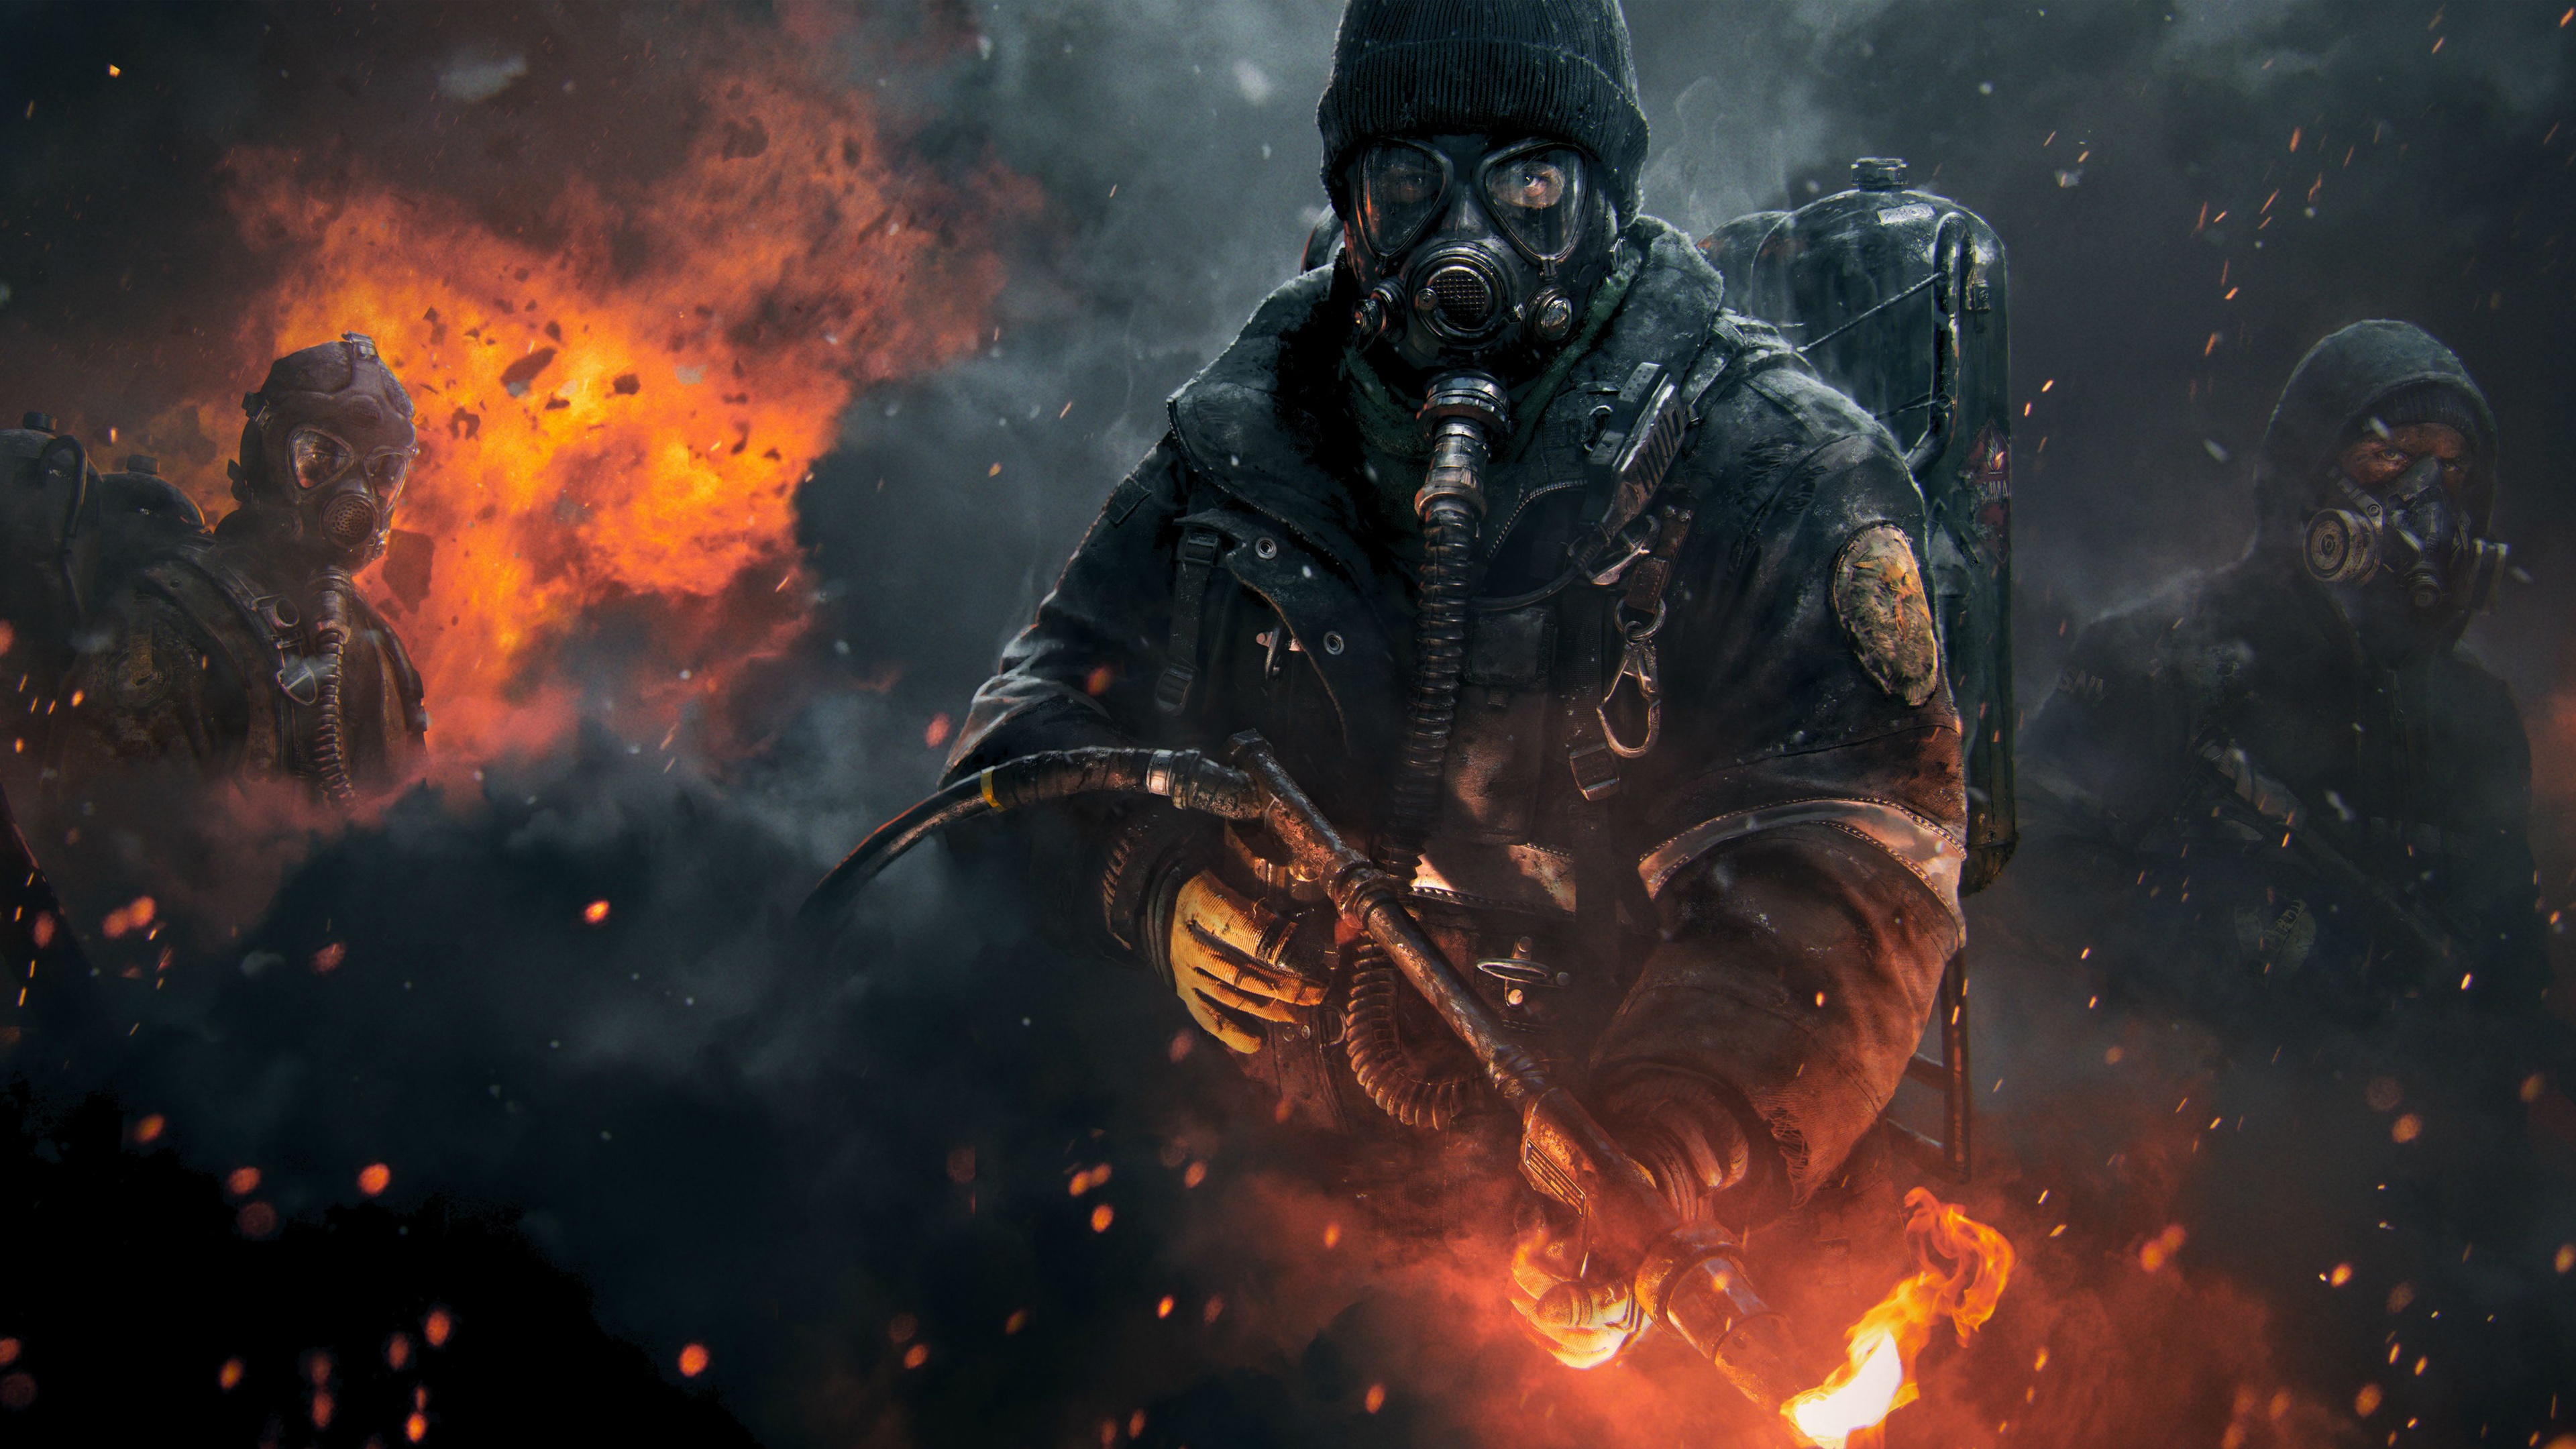 Tom Clancys The Division Wallpapers HD Wallpapers 3840x2160